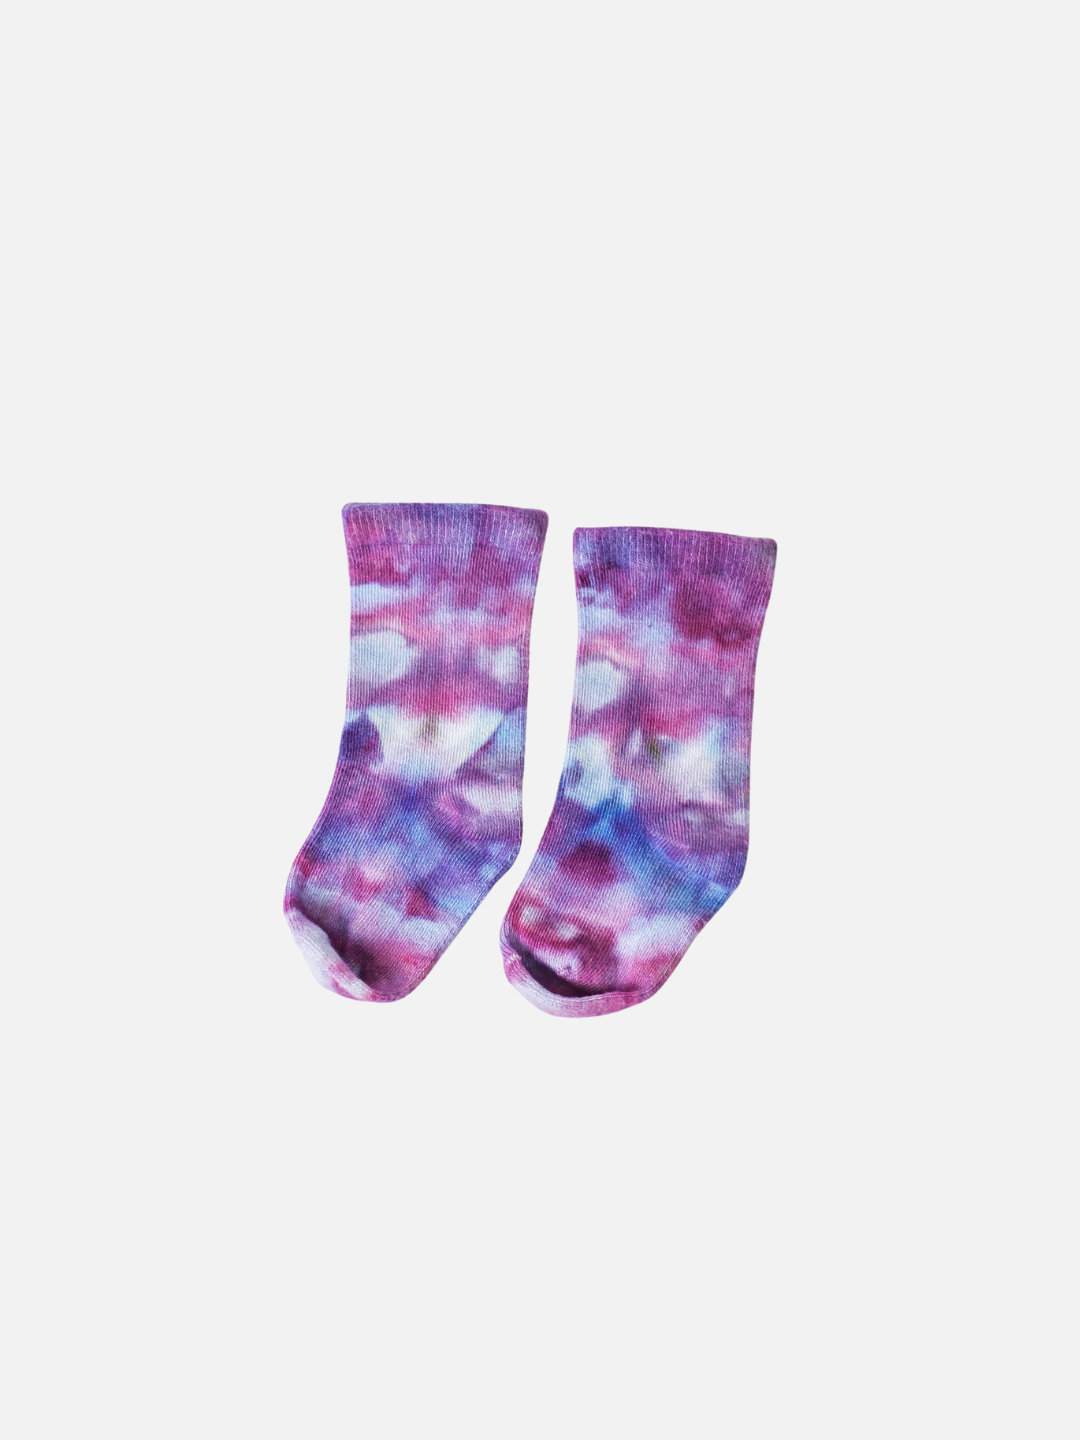 Ultraviolet | Pair of baby ankle socks in dappled shades of violet, pink and blue